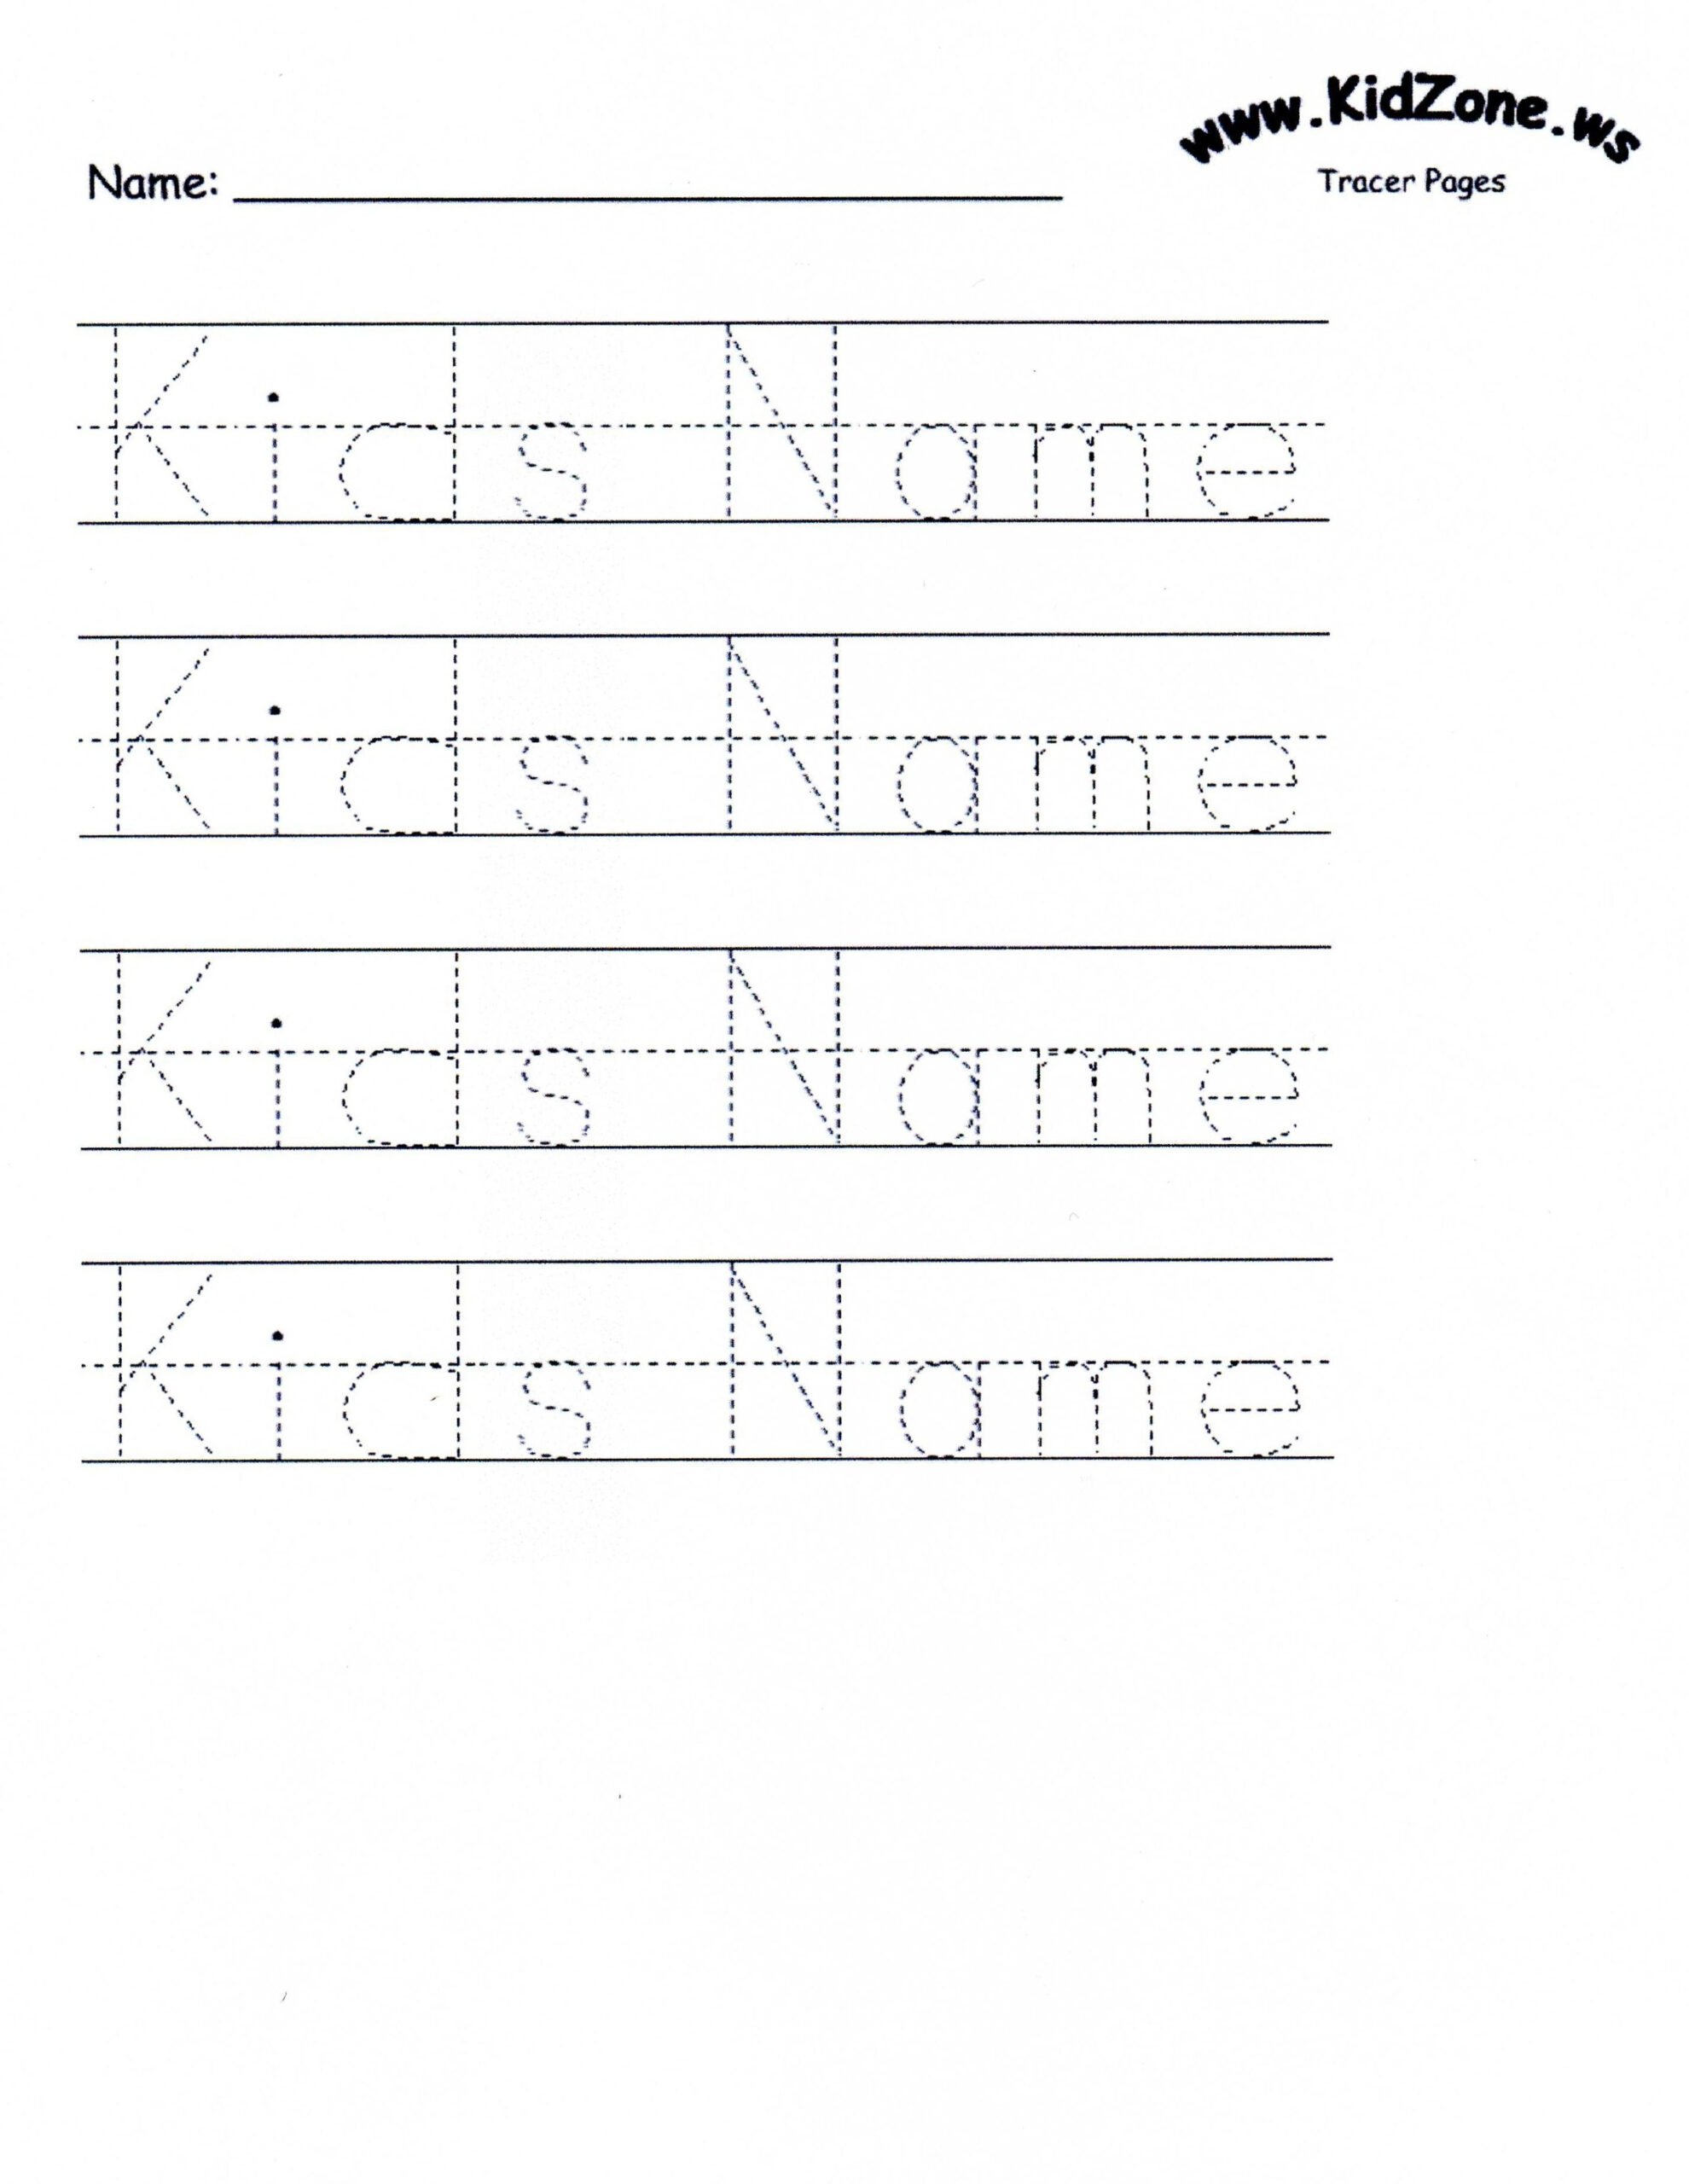 Customizable Printable Letter Pages | Name Tracing inside Name Tracing Guide